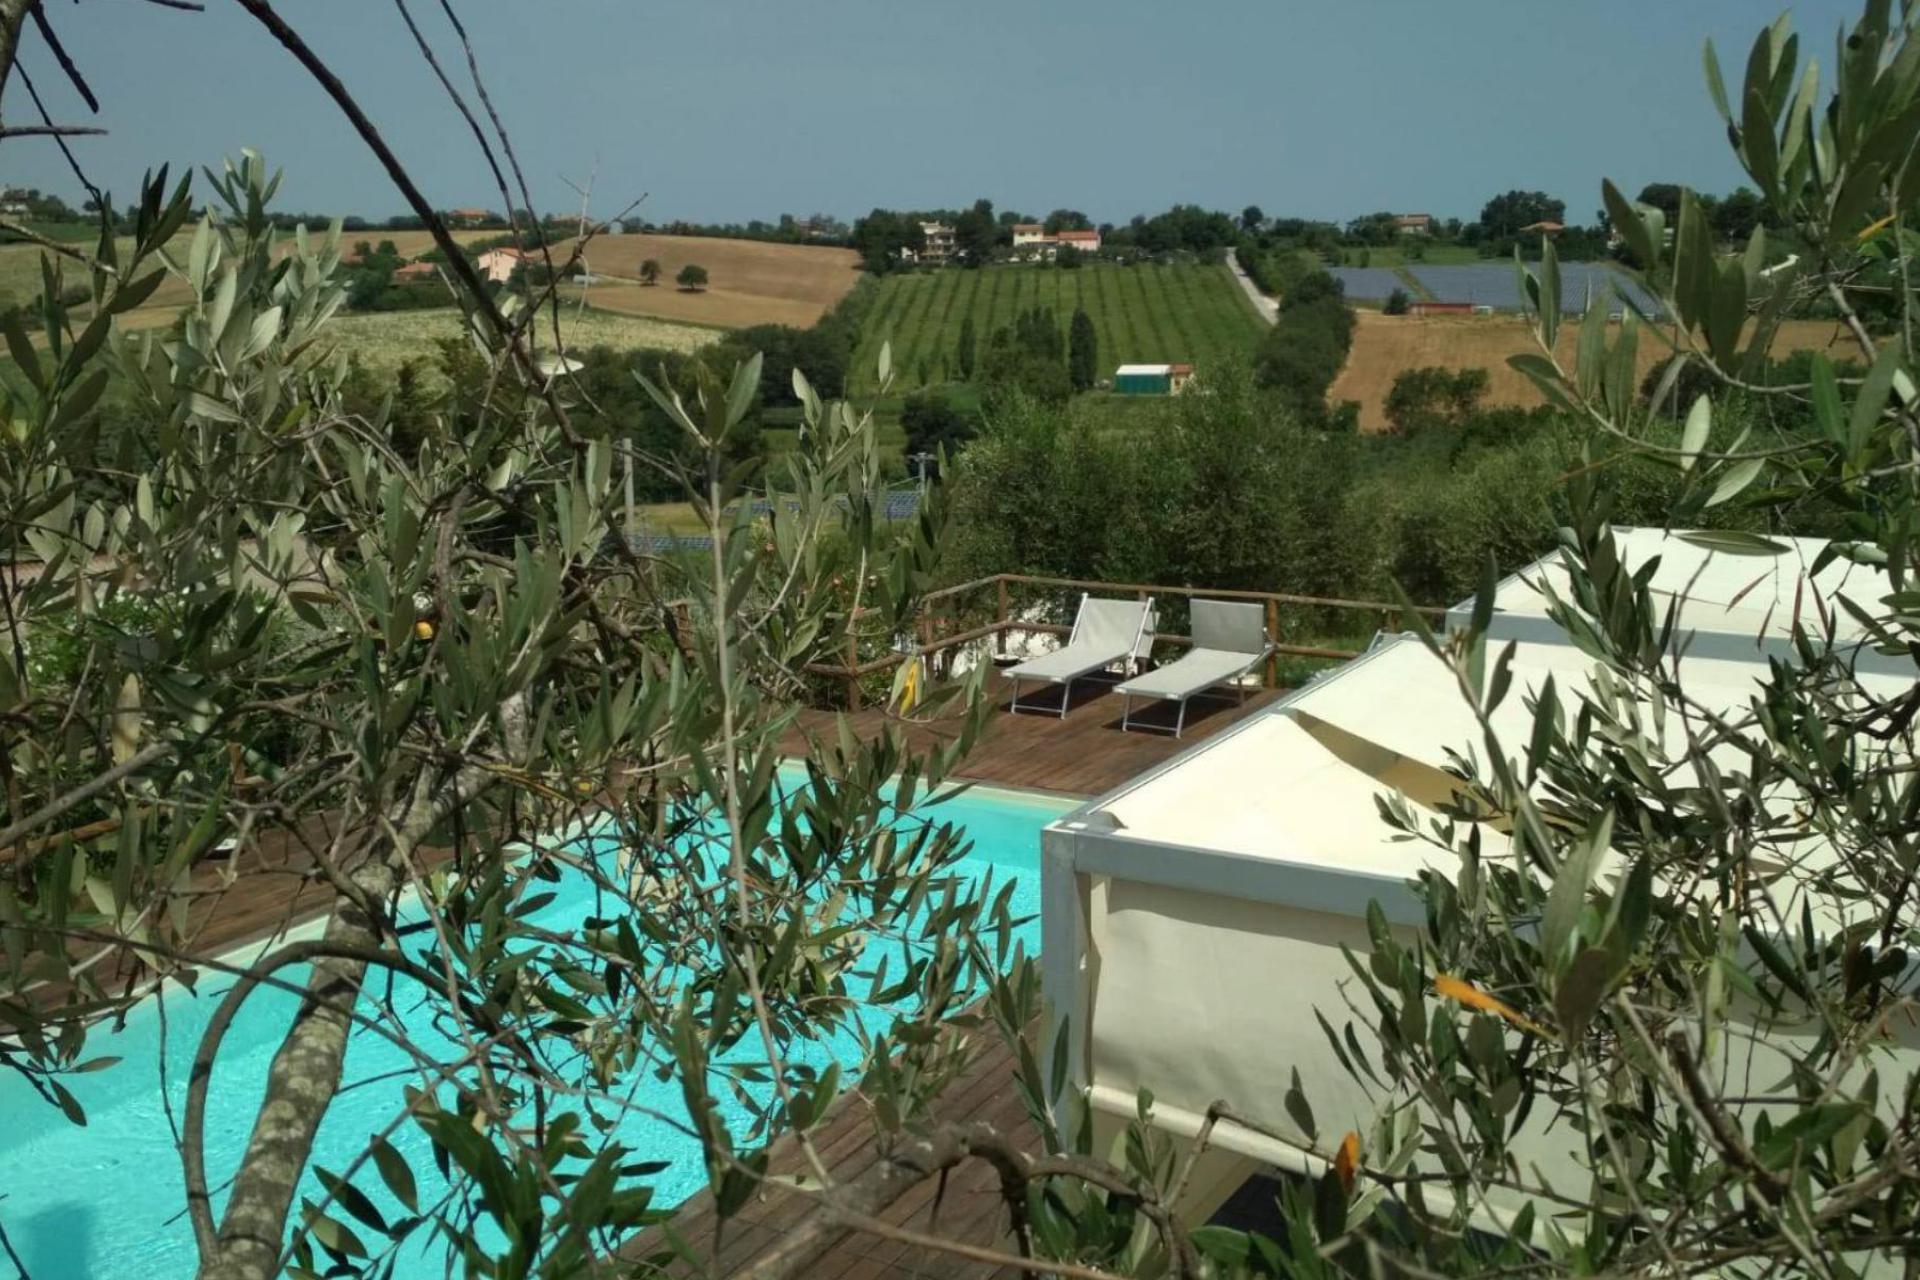 Agriturismo Marche Agriturismo Marche with restaurant in an olive grove